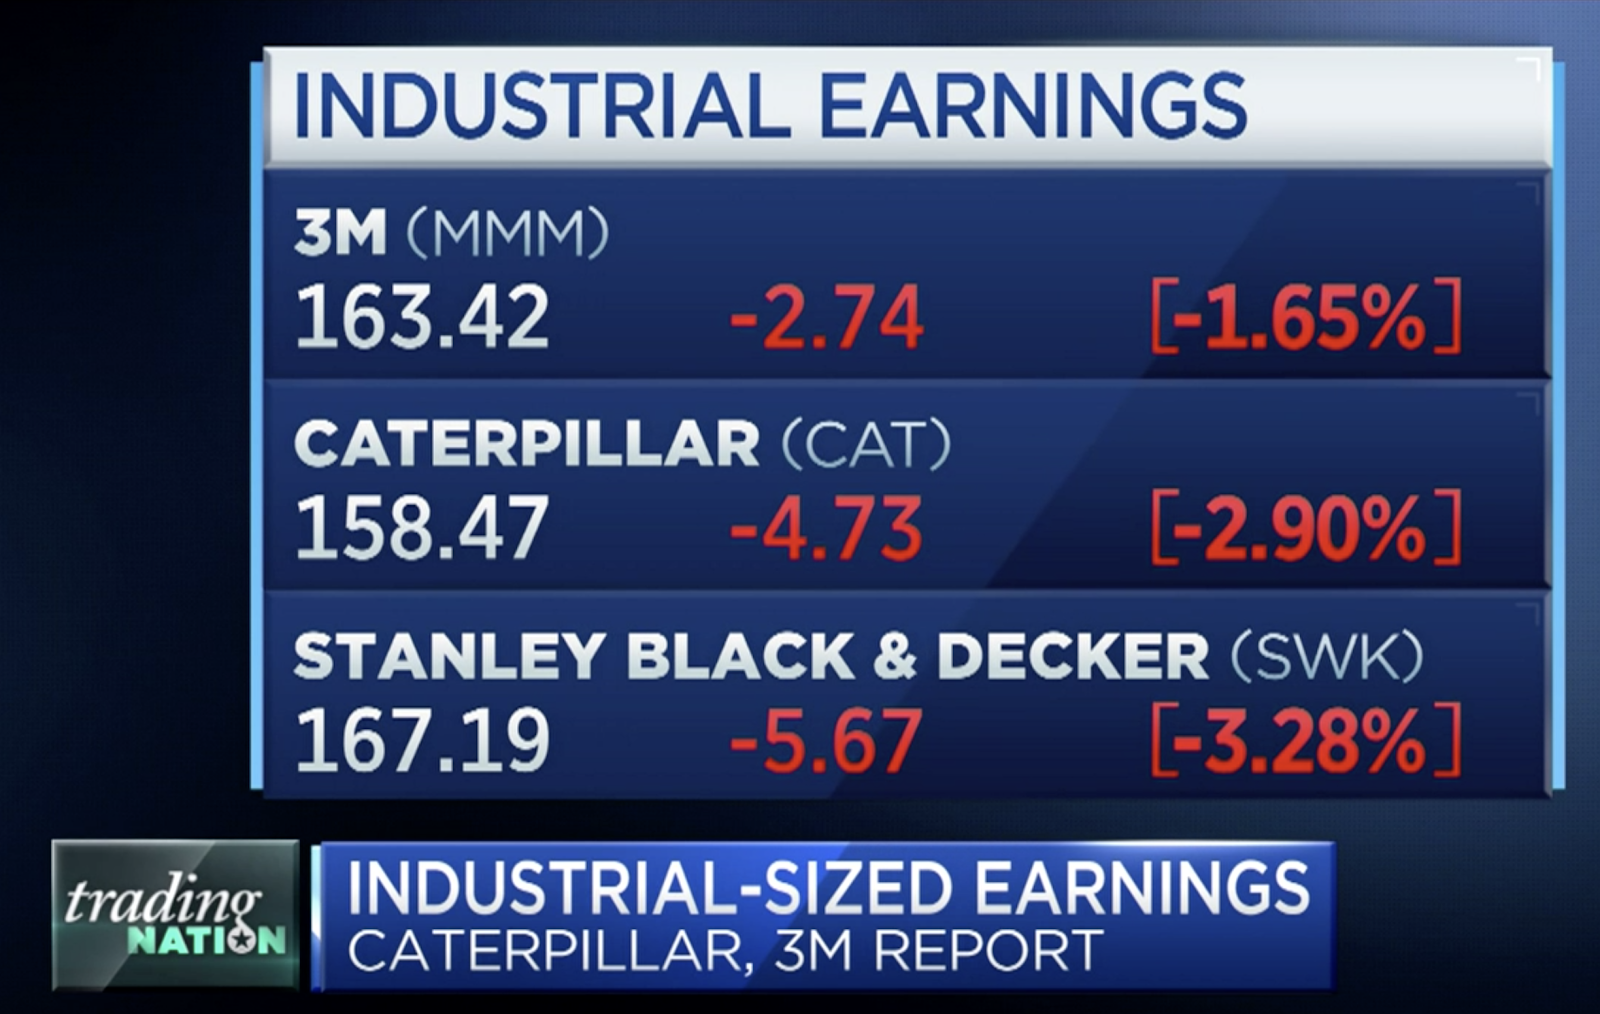 CNBC report of 3M, CAT, and SWK 2020 Q3 earnings.